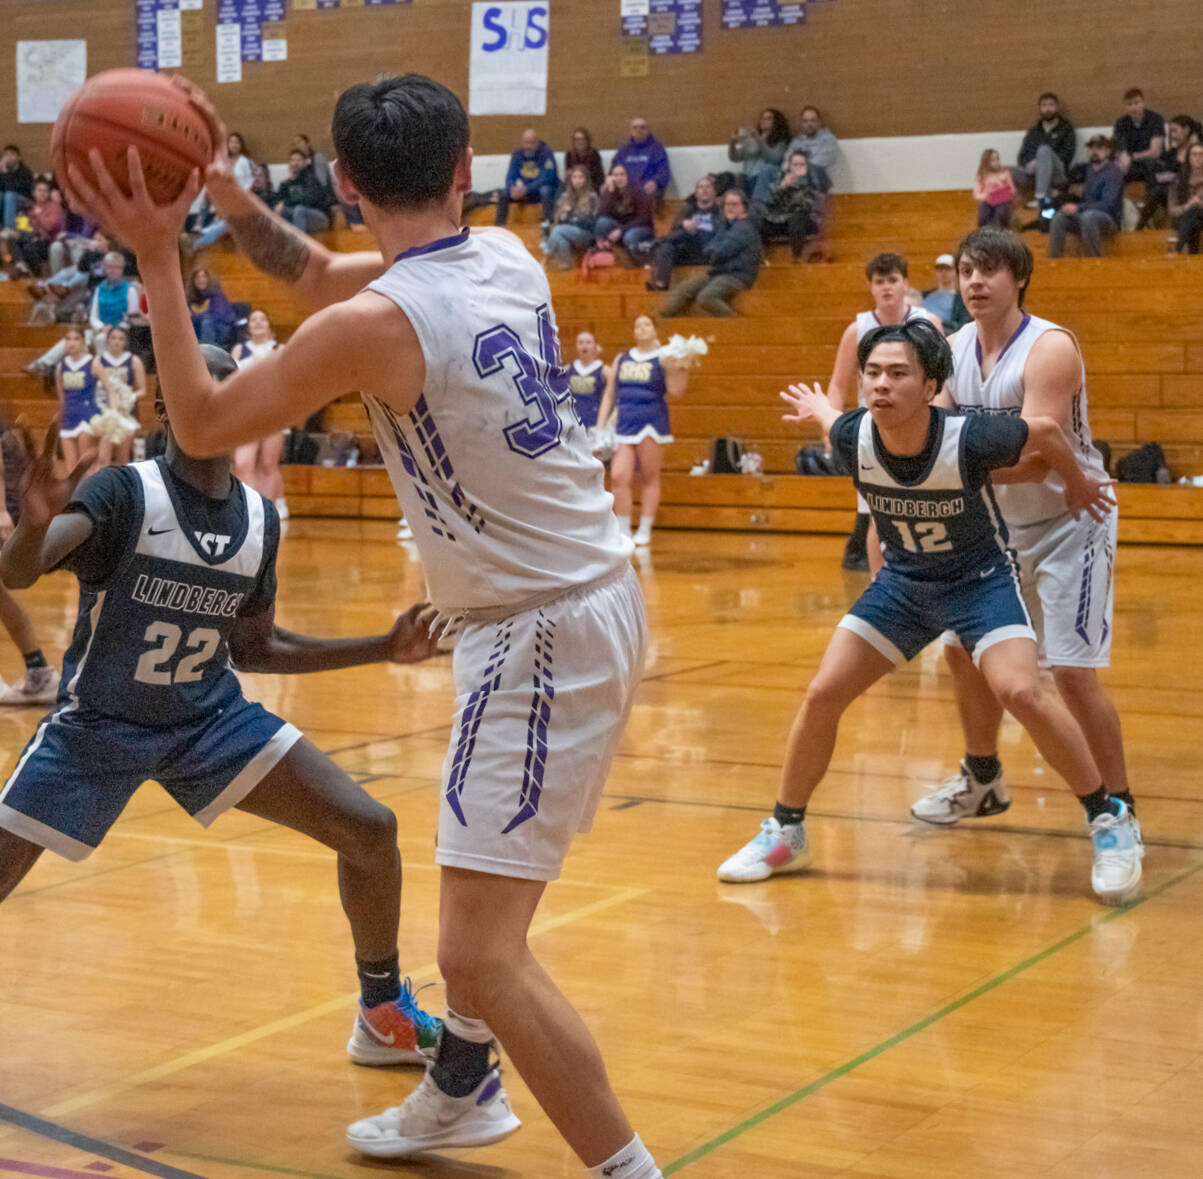 Sequim Gazette photo by Emily Matthiessen / Sequim’s Isaiah Moore (34) looks to pass to teammate Espn Judd as Lindbergh’s John Chuol (22) and Justin Tu (12) defend in a Feb. 15 West Central District tournament game in Sequim. The Wolves’ topped Lindbergh, 66-37.